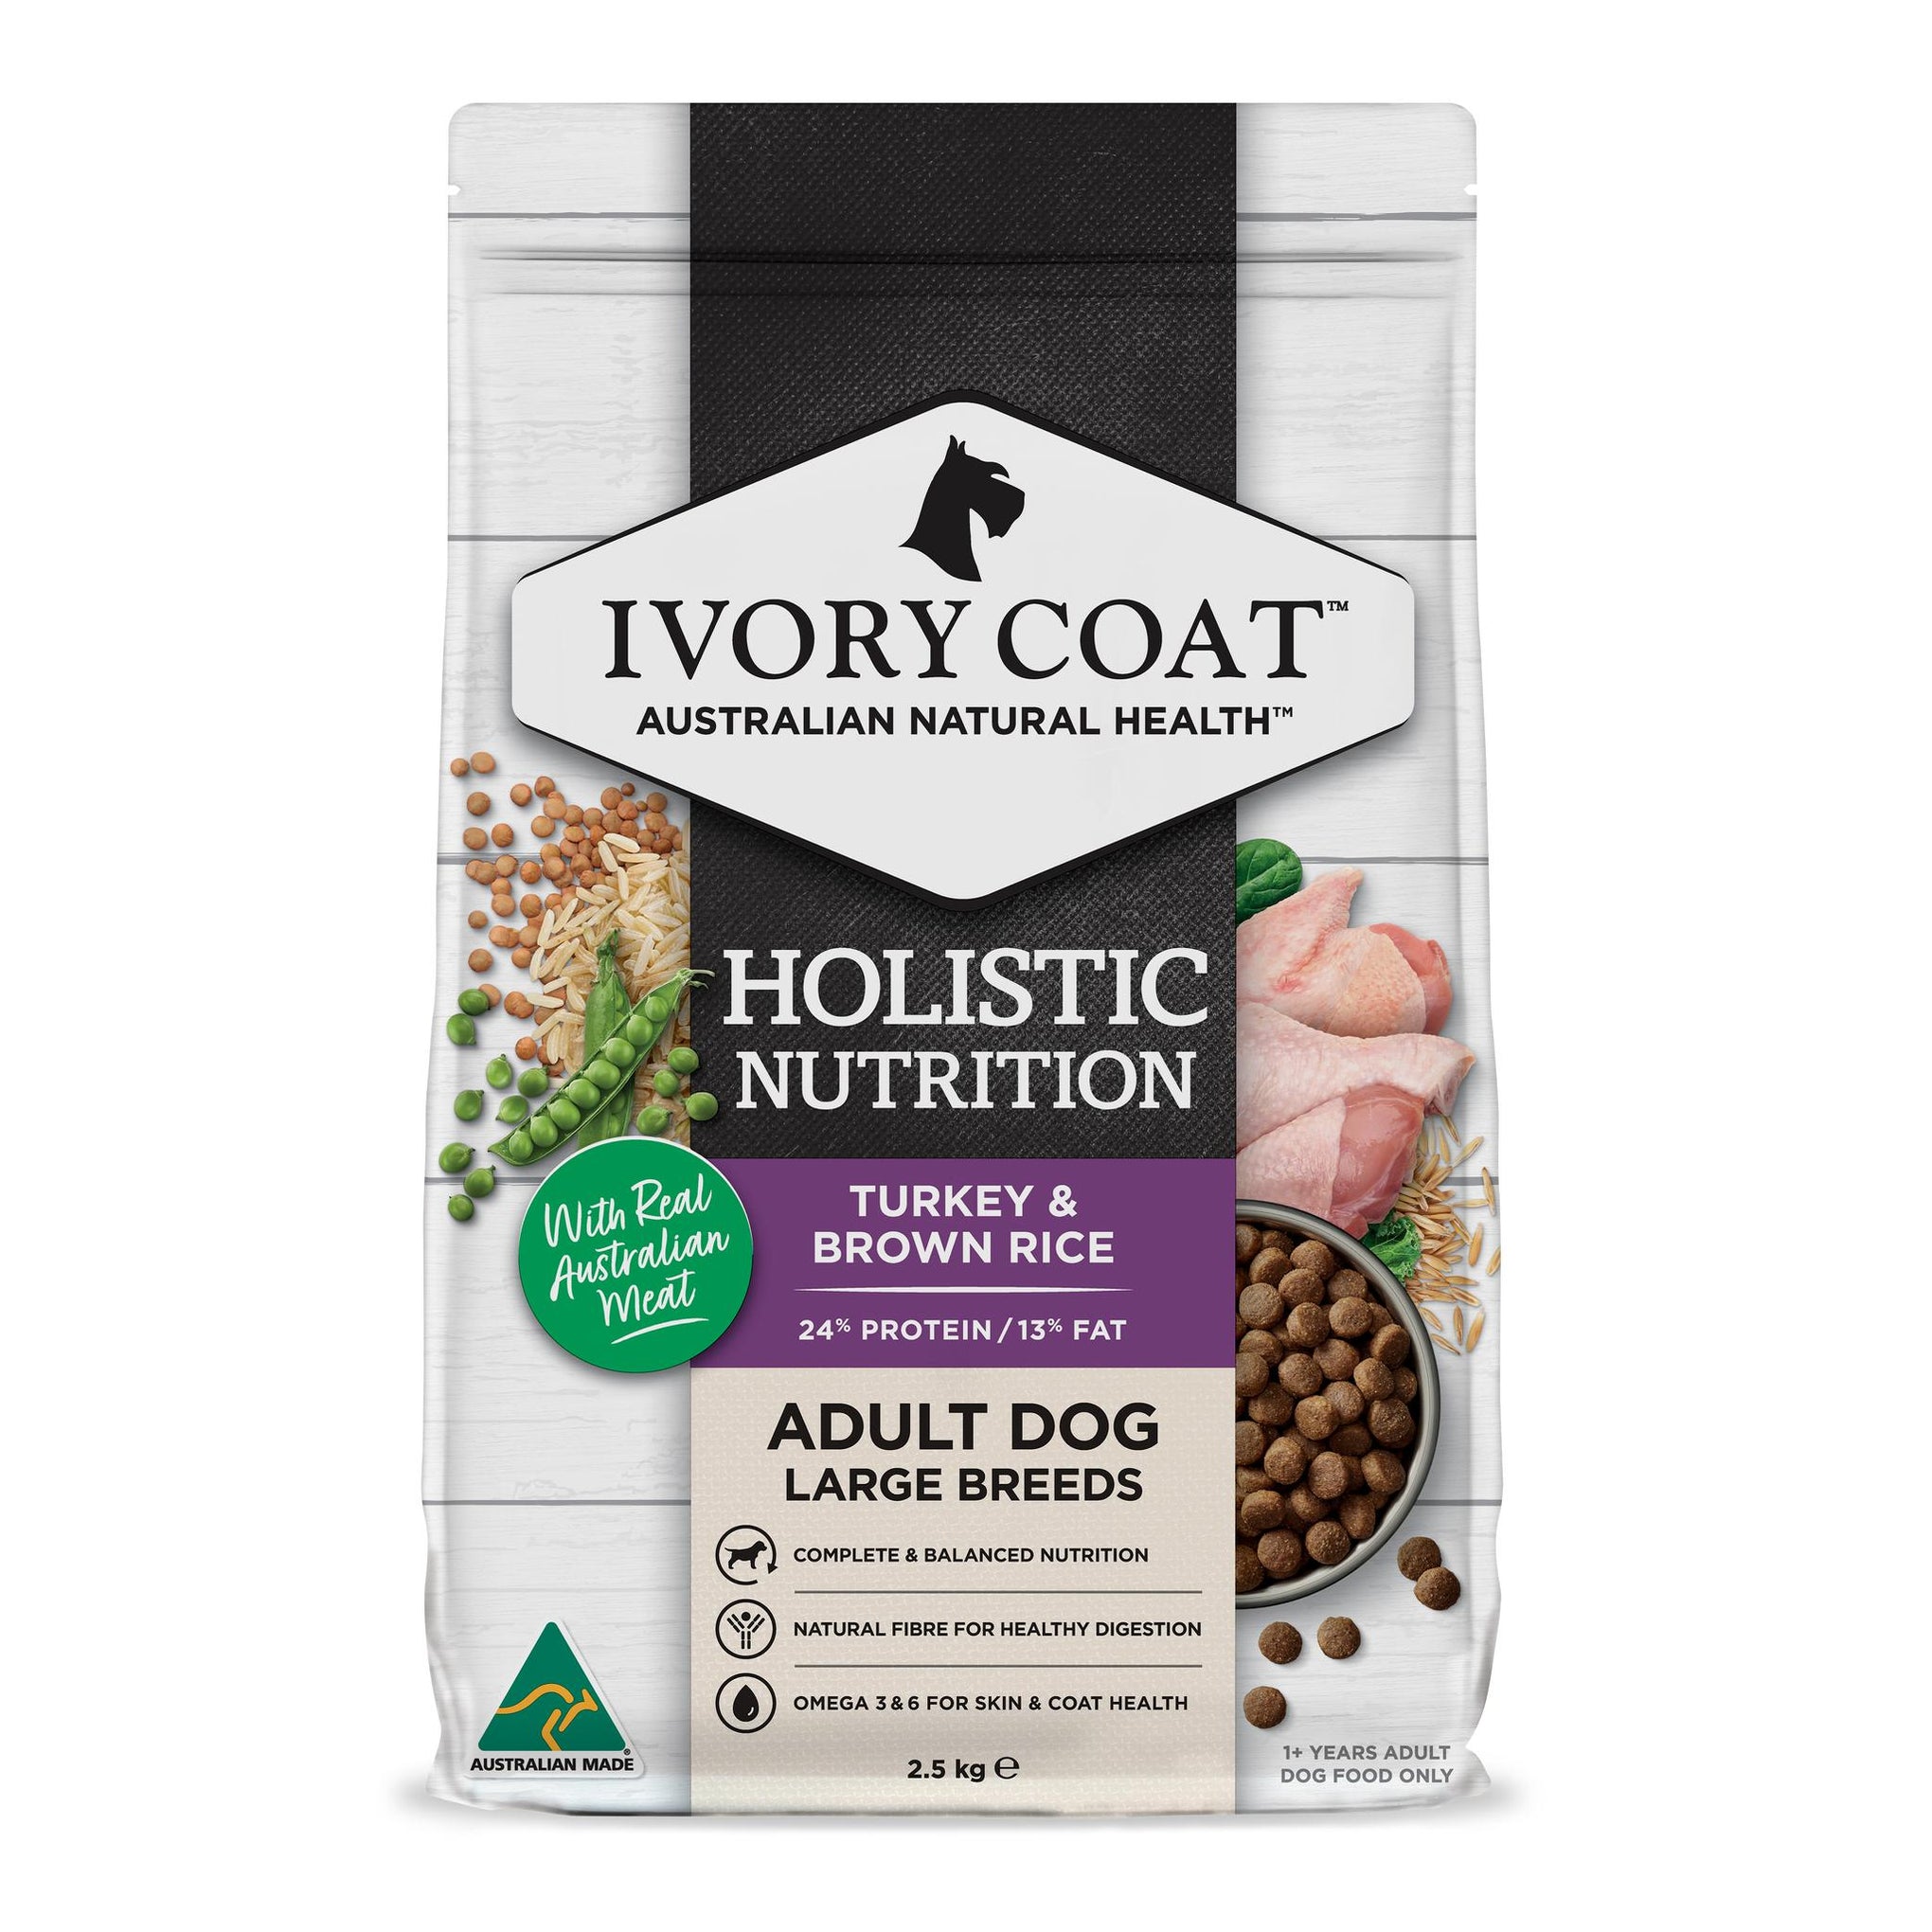 Ivory Coat Holistic Nutrition Adult Large Breed Turkey and Brown Rice